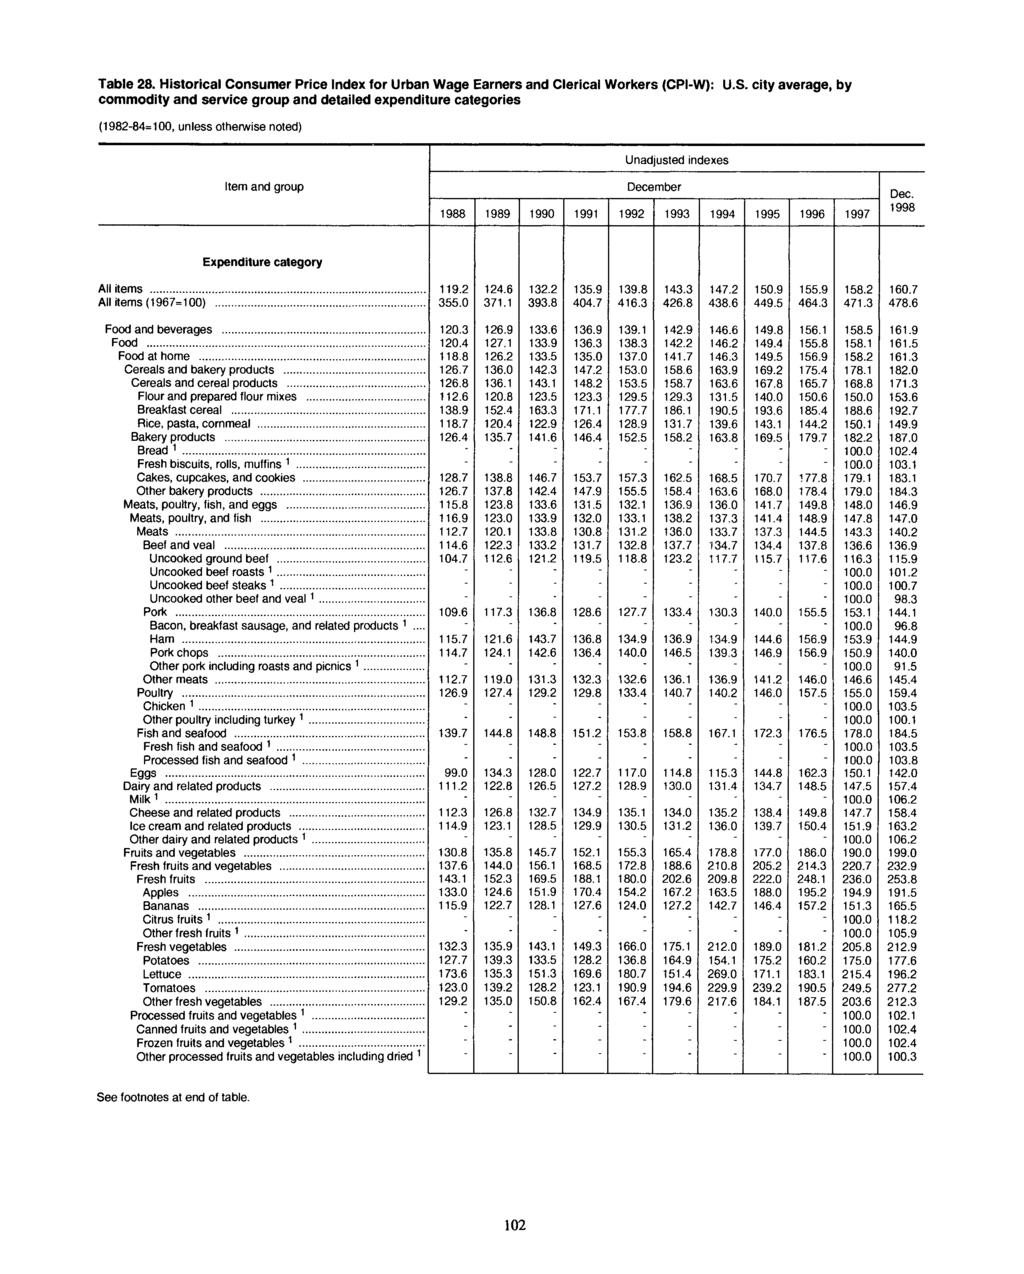 Table 28. Historical Consumer Price for Urban Wage Earners and Clerical Workers (CP1-W): U.S.